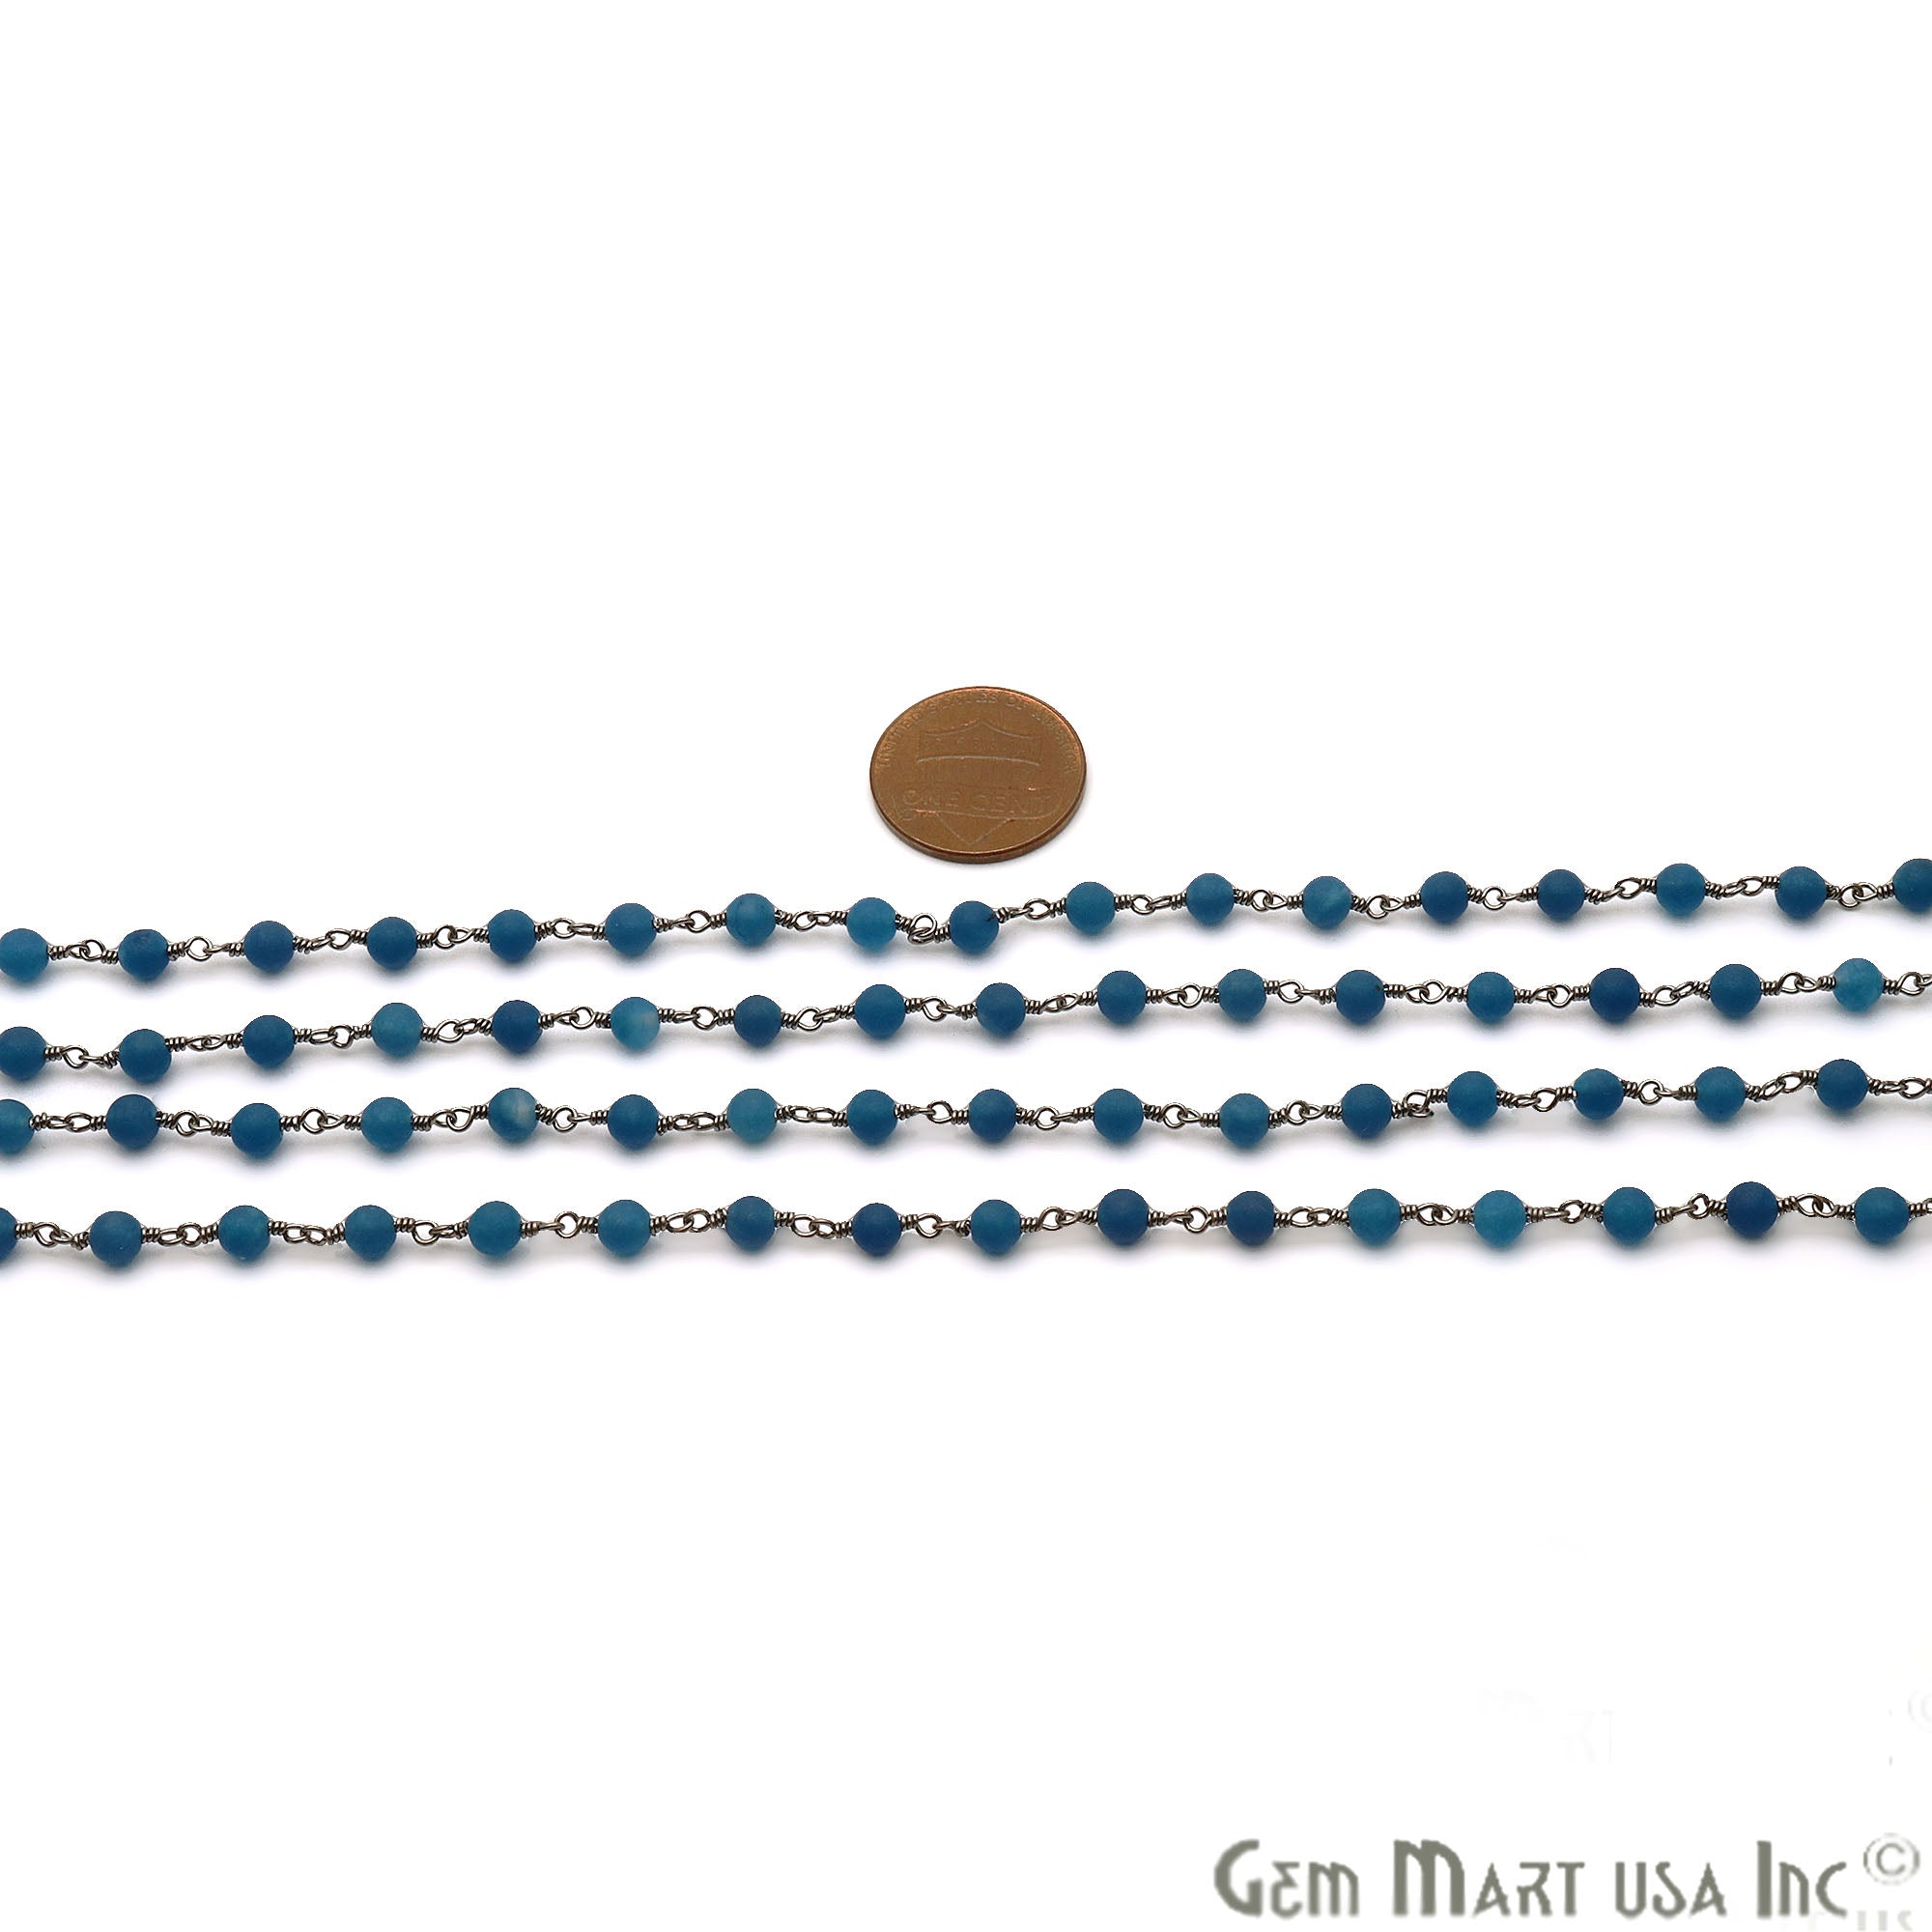 Blue Jade 4mm Round Oxidized Wire Wrapped Matte Beads Rosary Chain - GemMartUSA